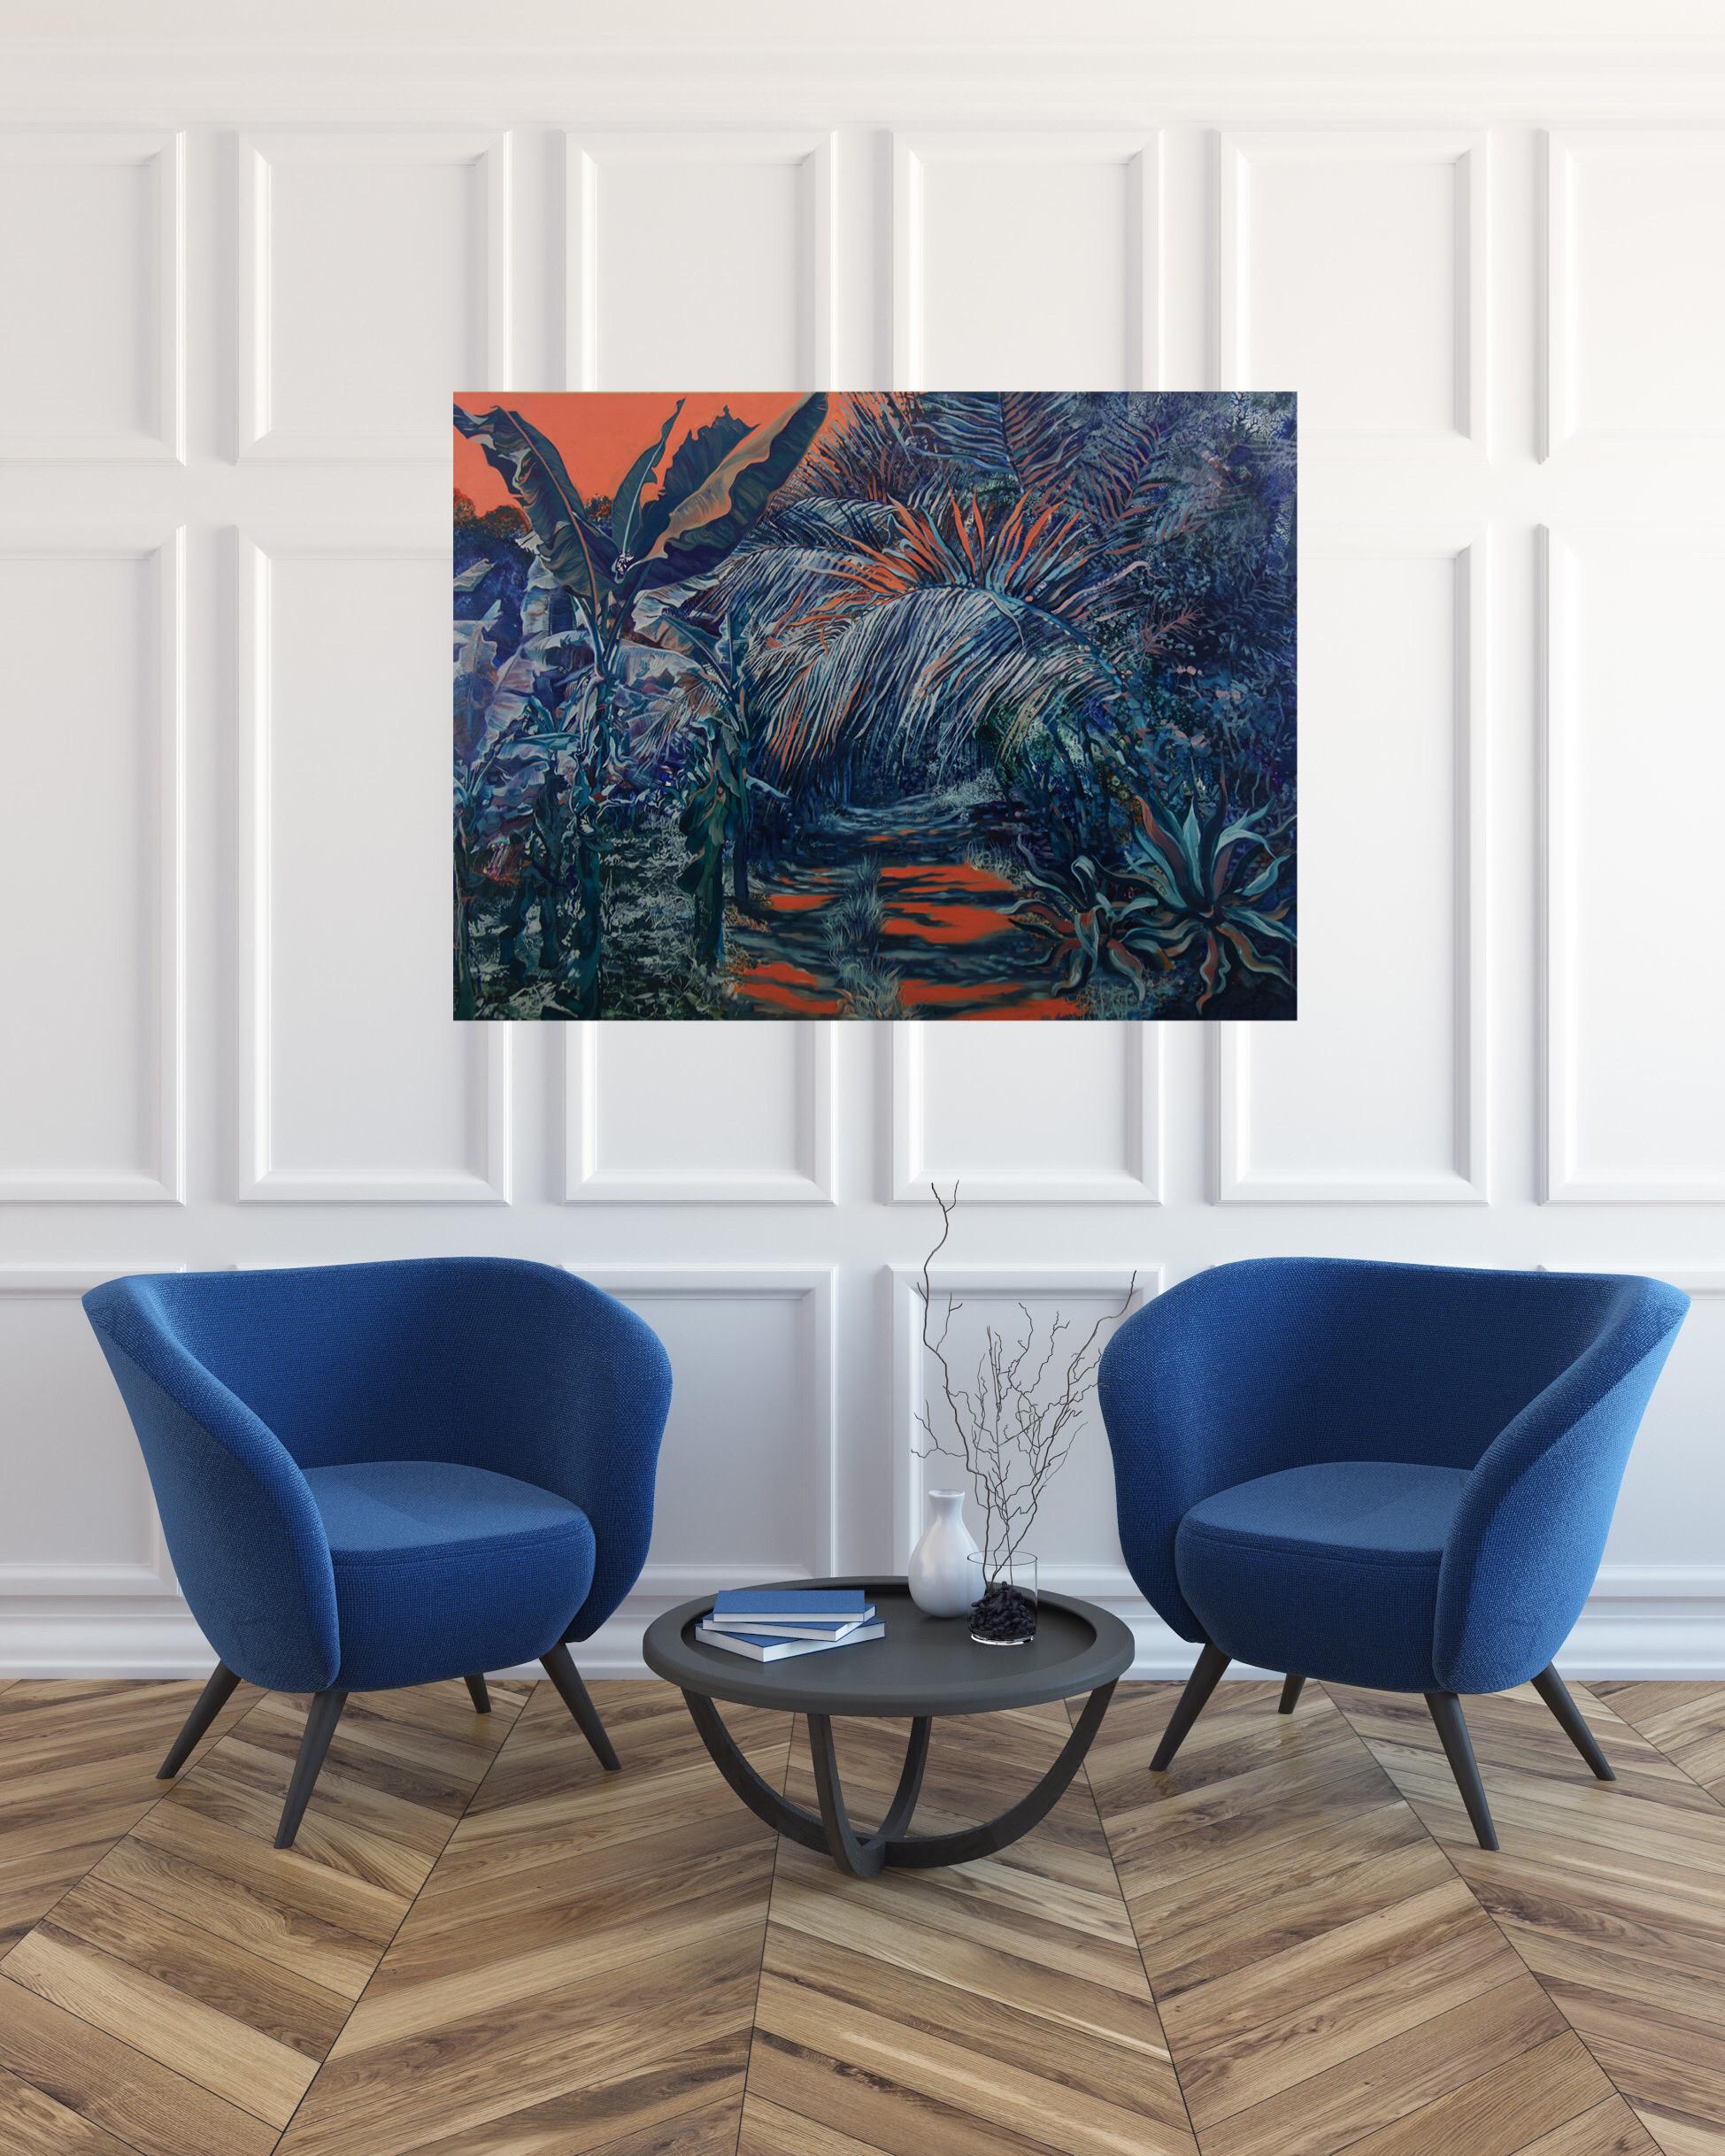 Rainforest sunset-oil on wood panel, made in blue, green, orange colors - Painting by Nikolina Kovalenko